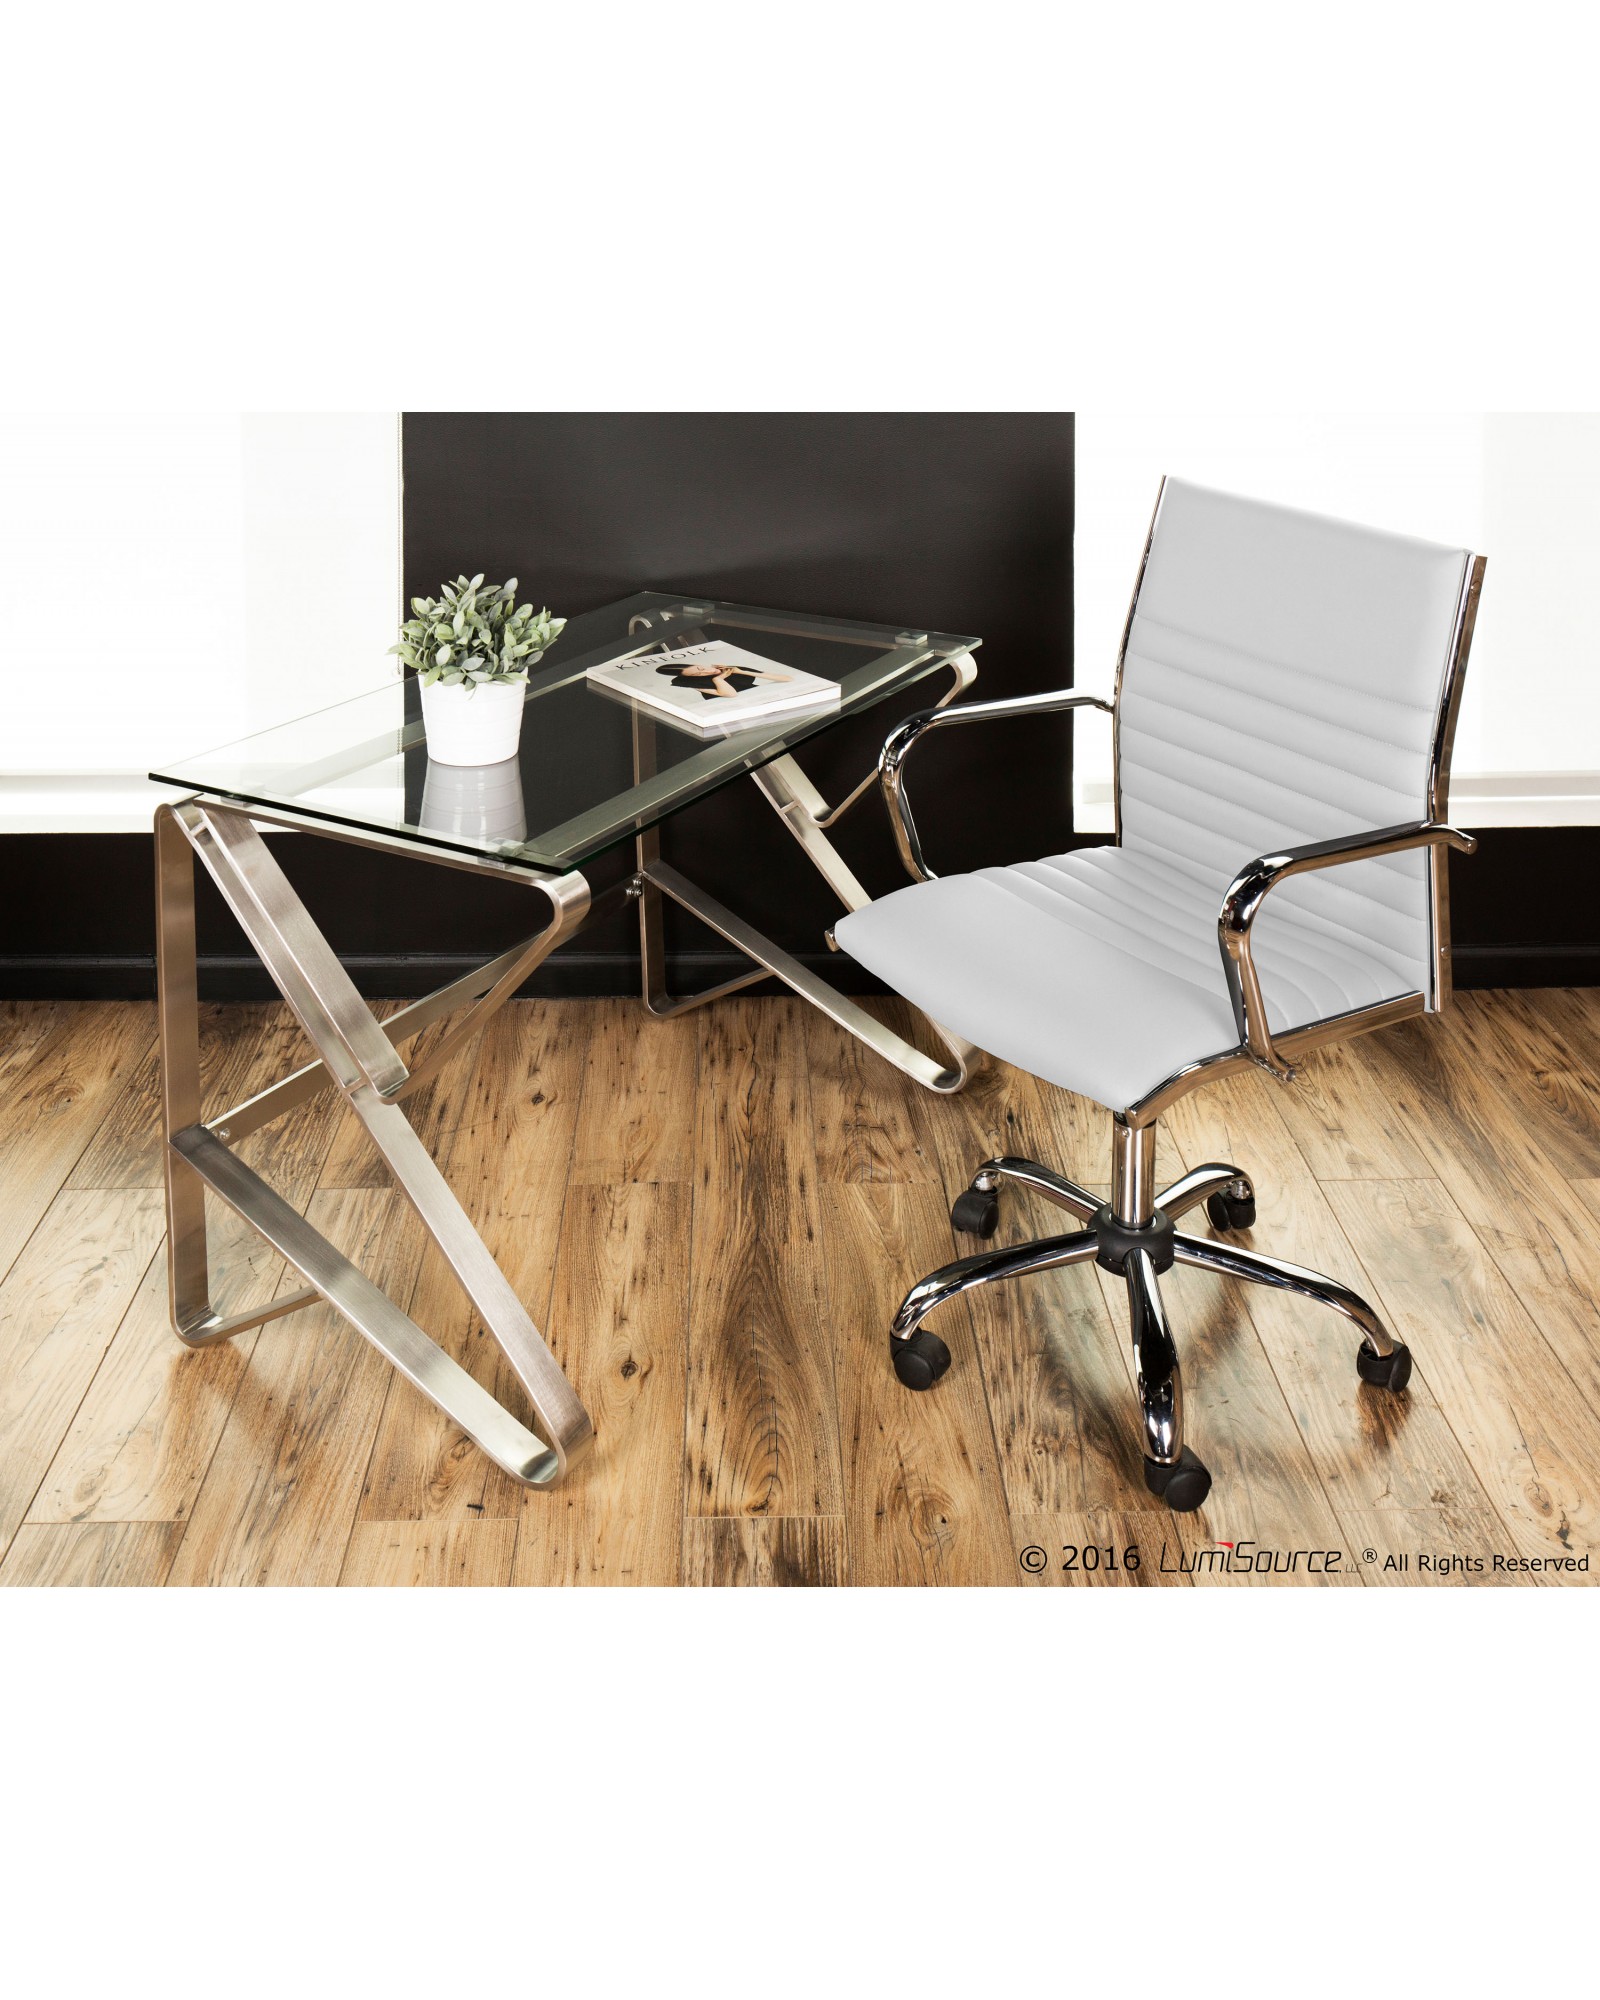 Master Contemporary Adjustable Office Chair with Swivel in White Faux Leather